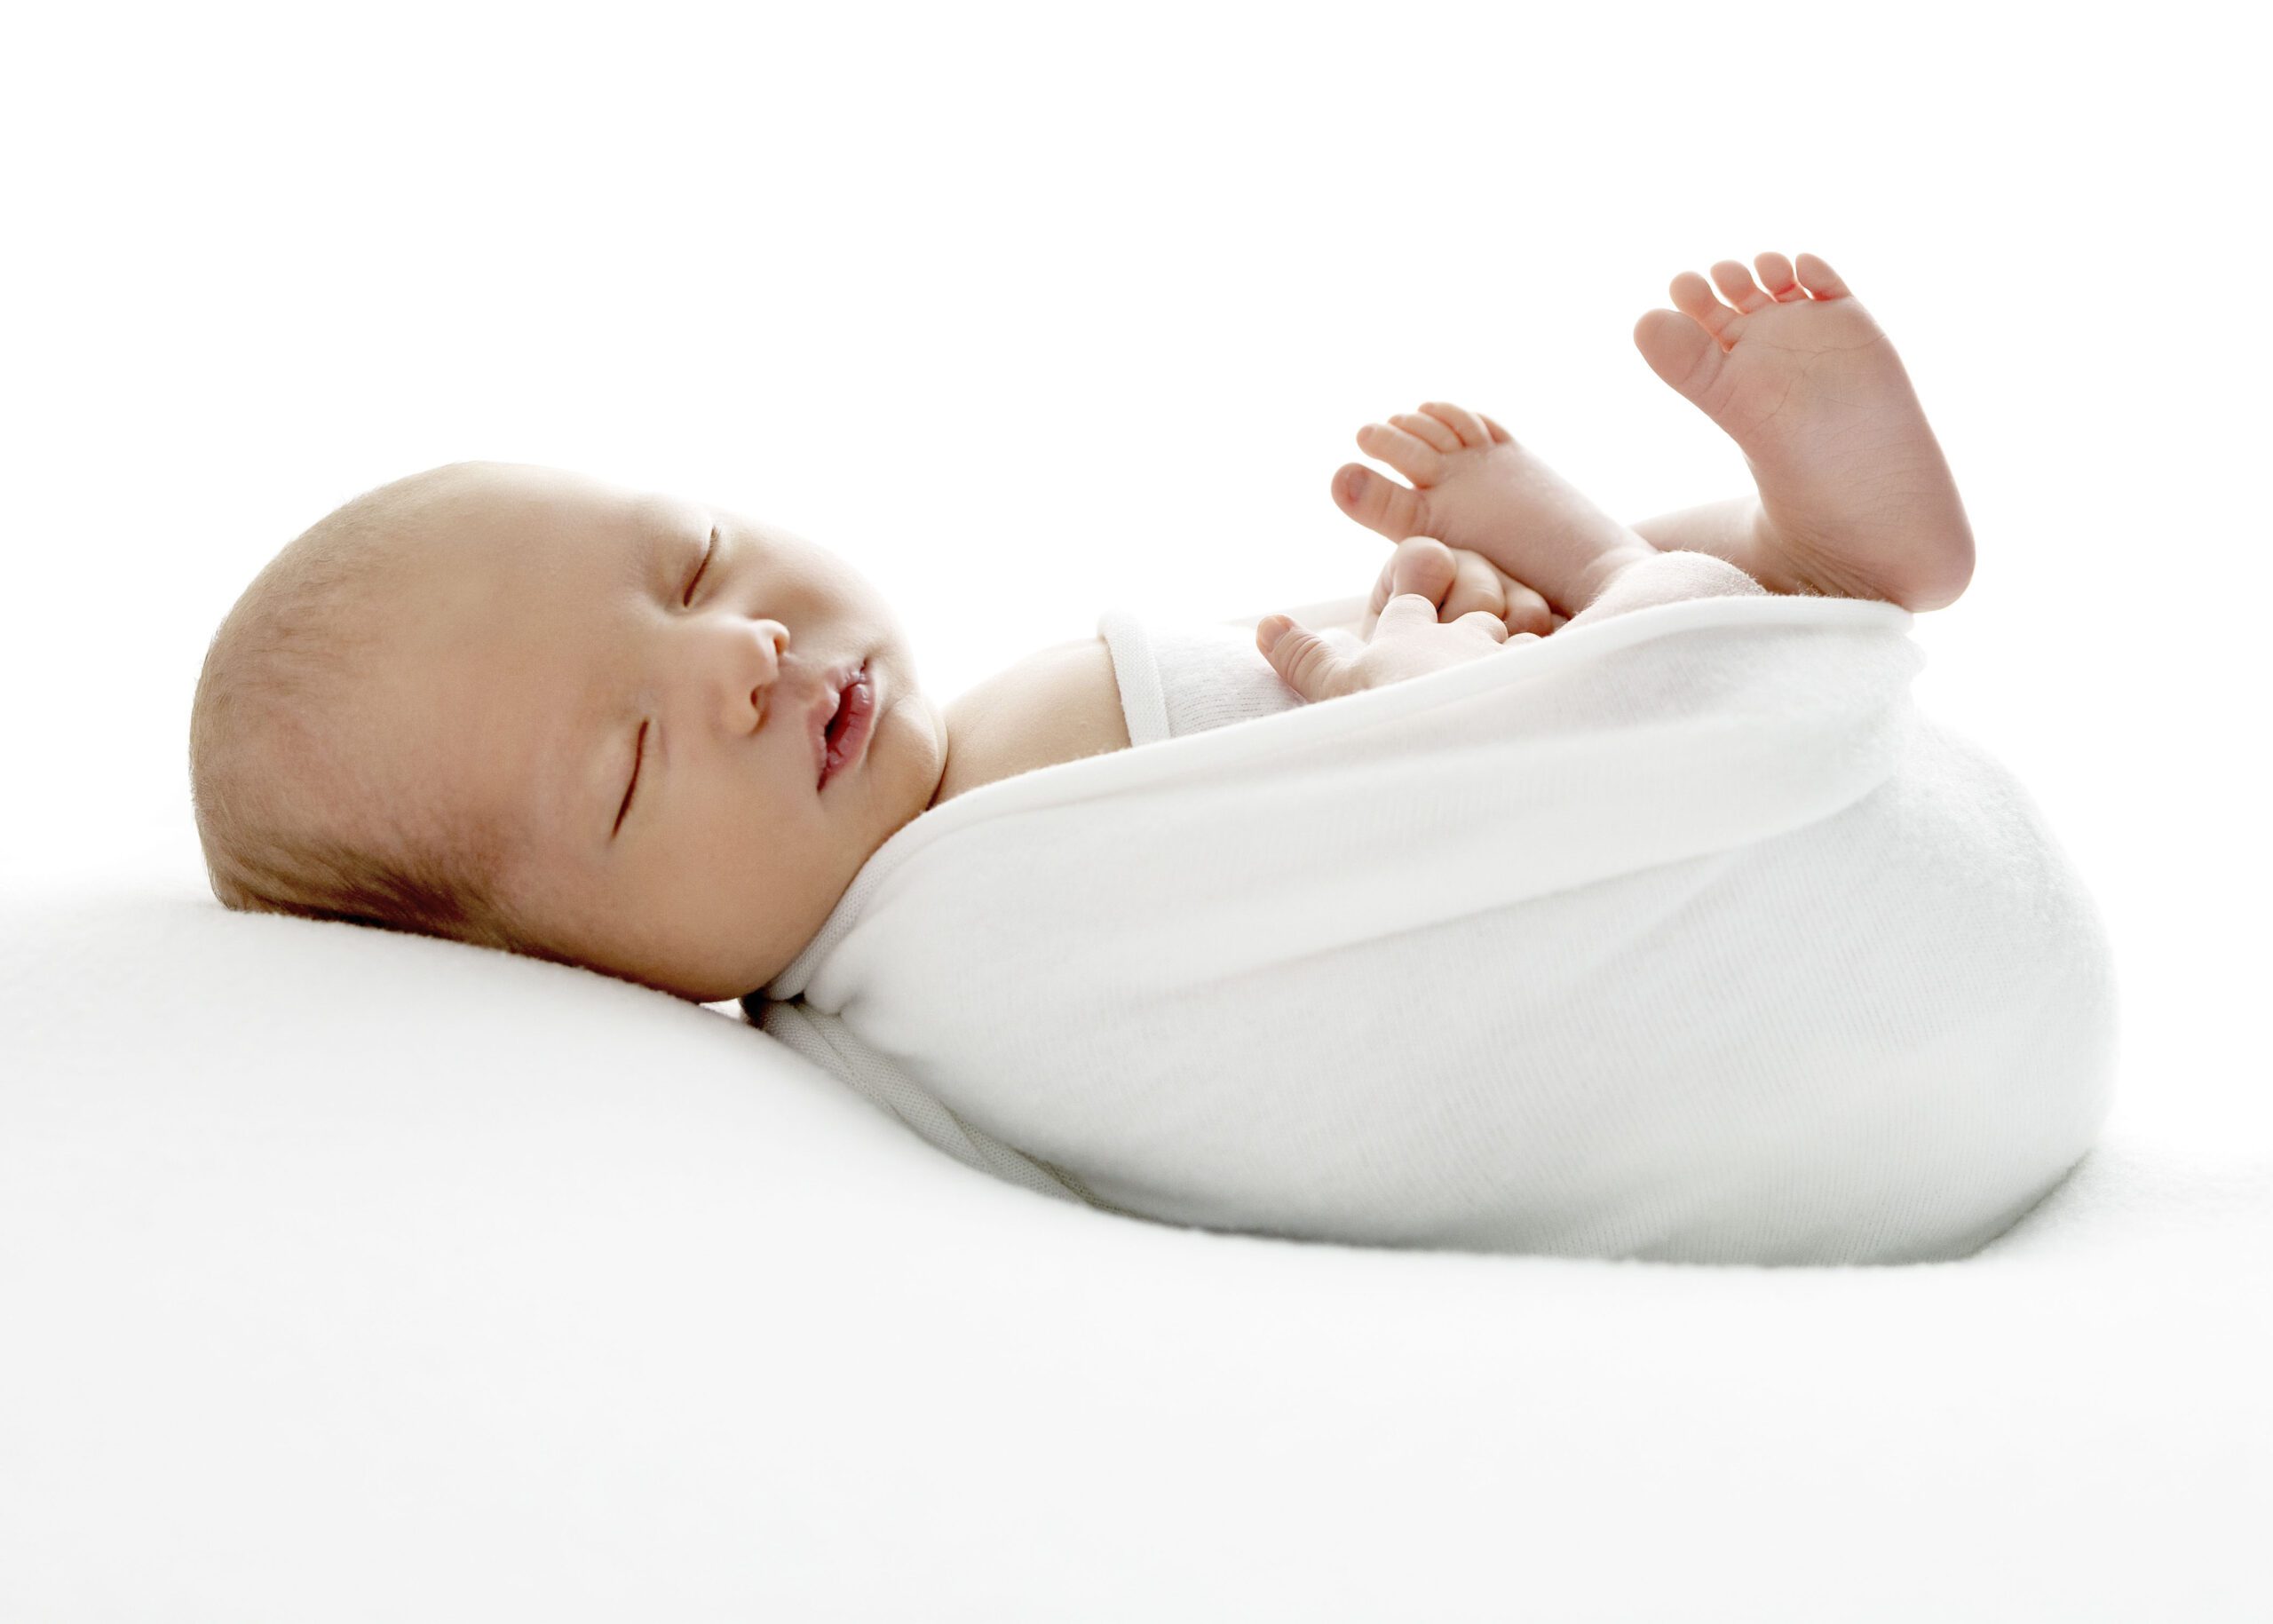 Newborn baby sleeping with white wrap around body and toes sticking up in the air